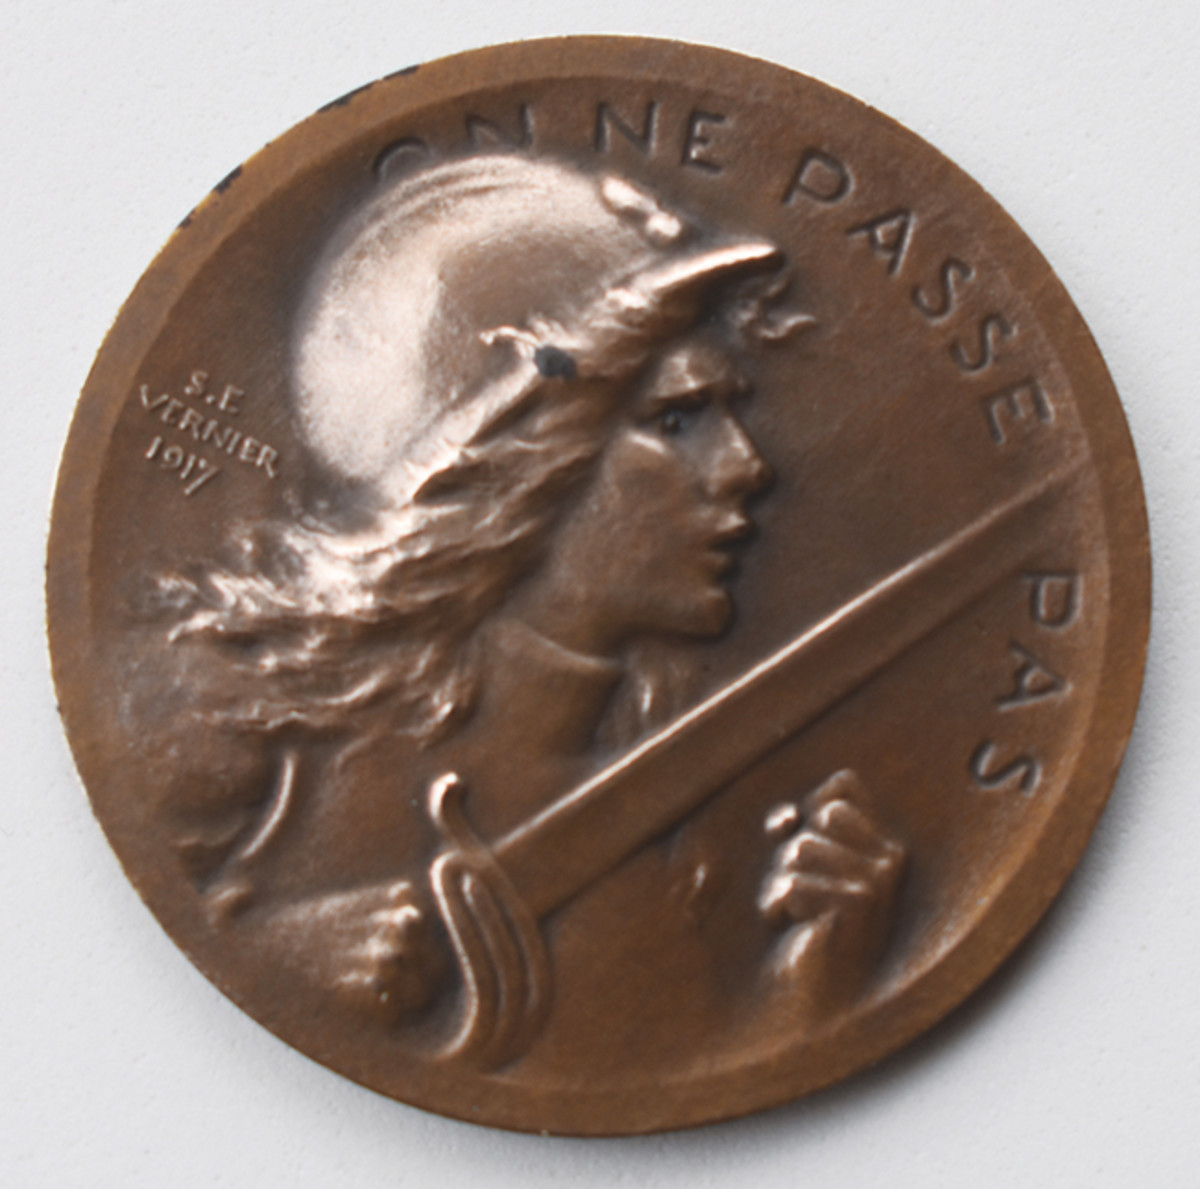 The Vernier version of the medal is the only one to incorporate the date of “1917” in the design. It can be seen to the left of the female figure with Vernier maker’s mark.